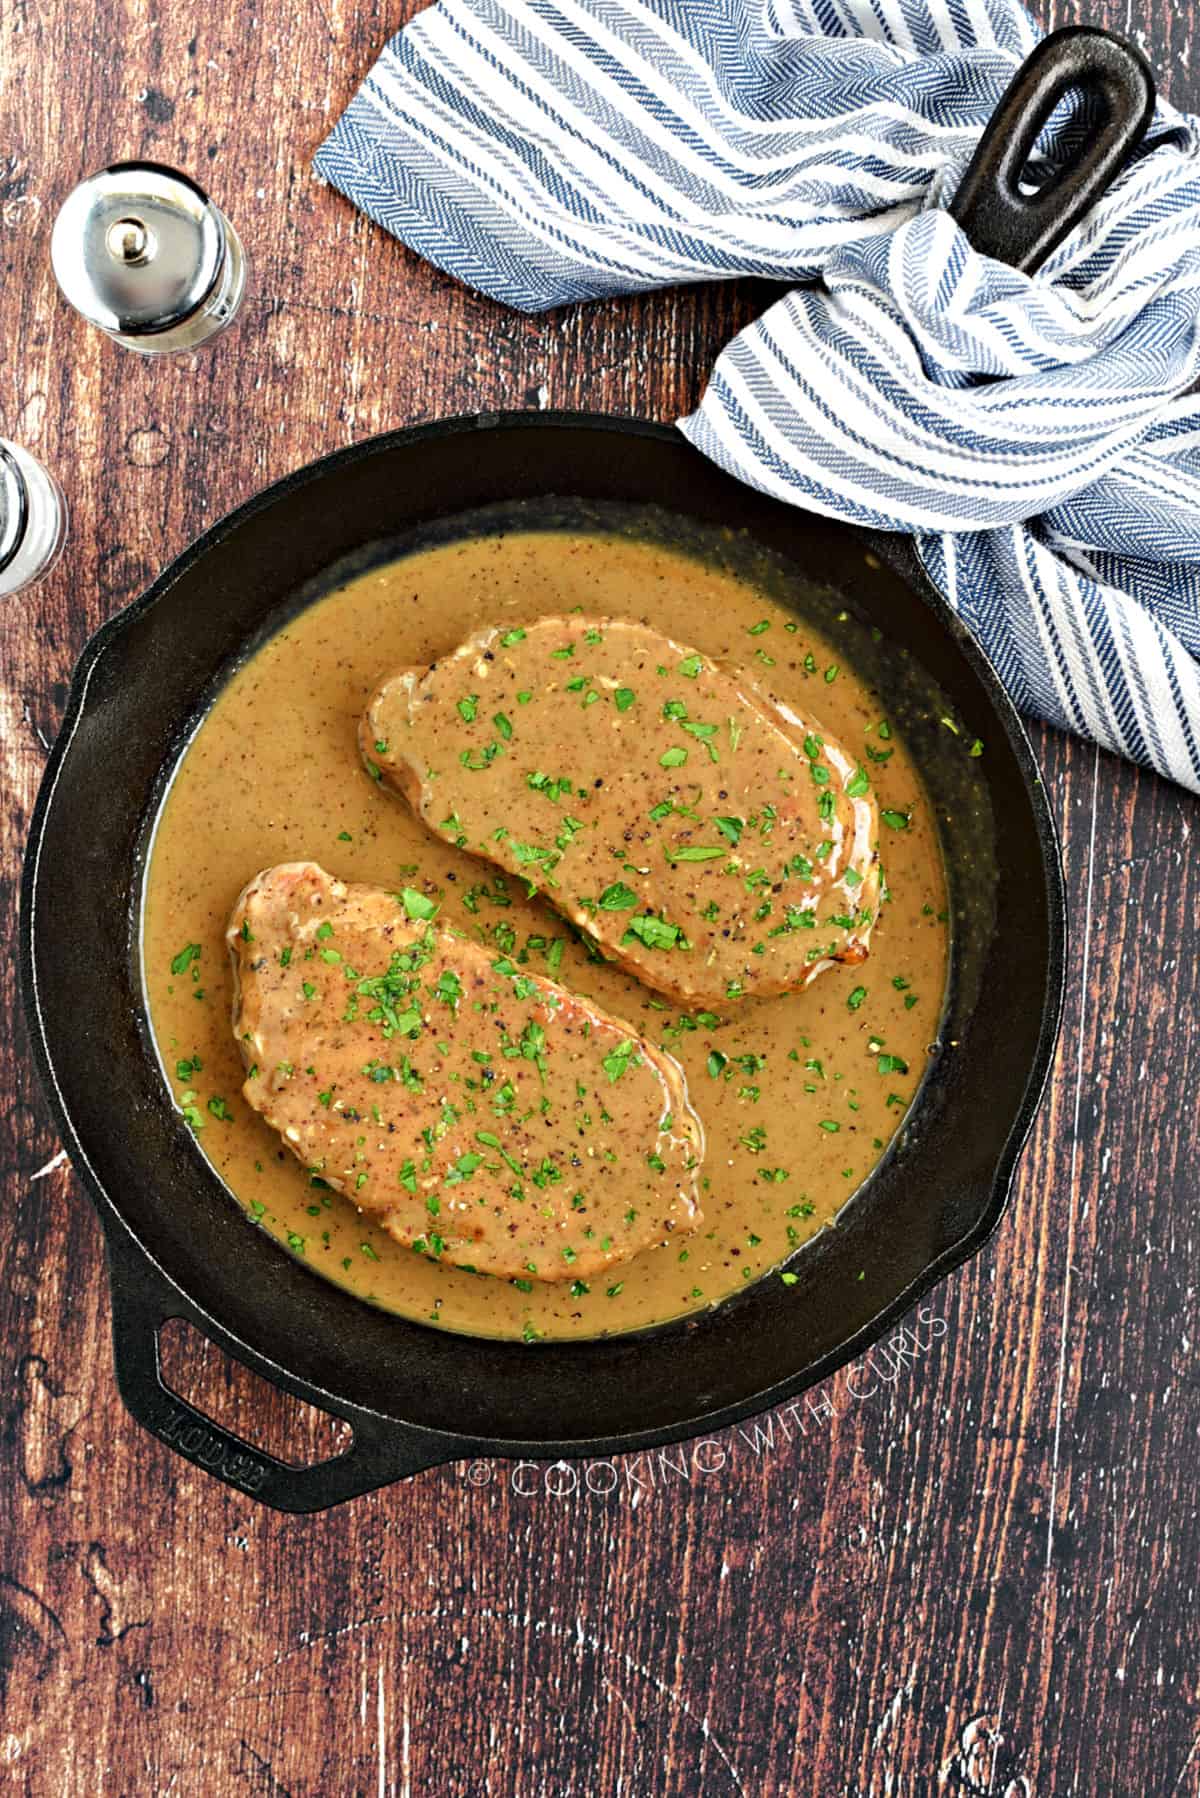 Looking down on two Pork Chops covered with Pan Gravy.